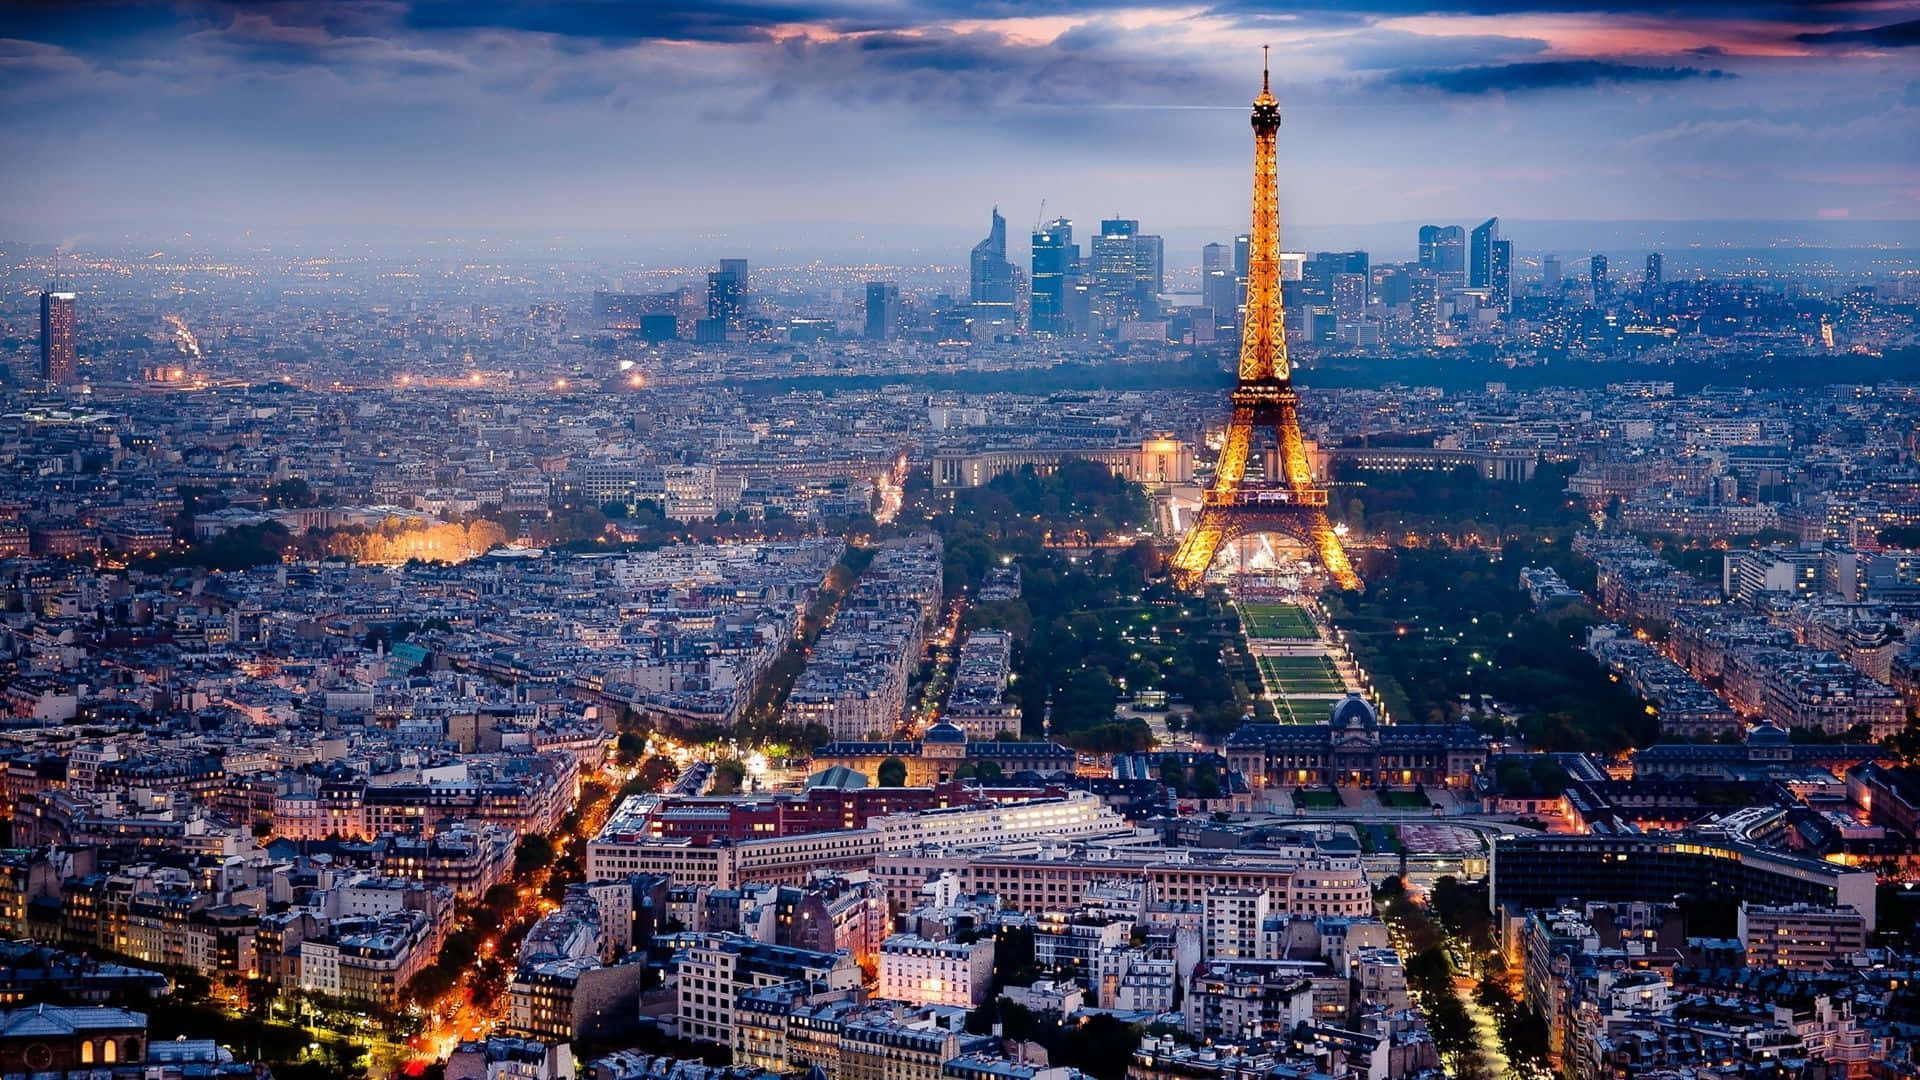 Enjoy the scenic view of the Eiffel Tower in Paris Wallpaper